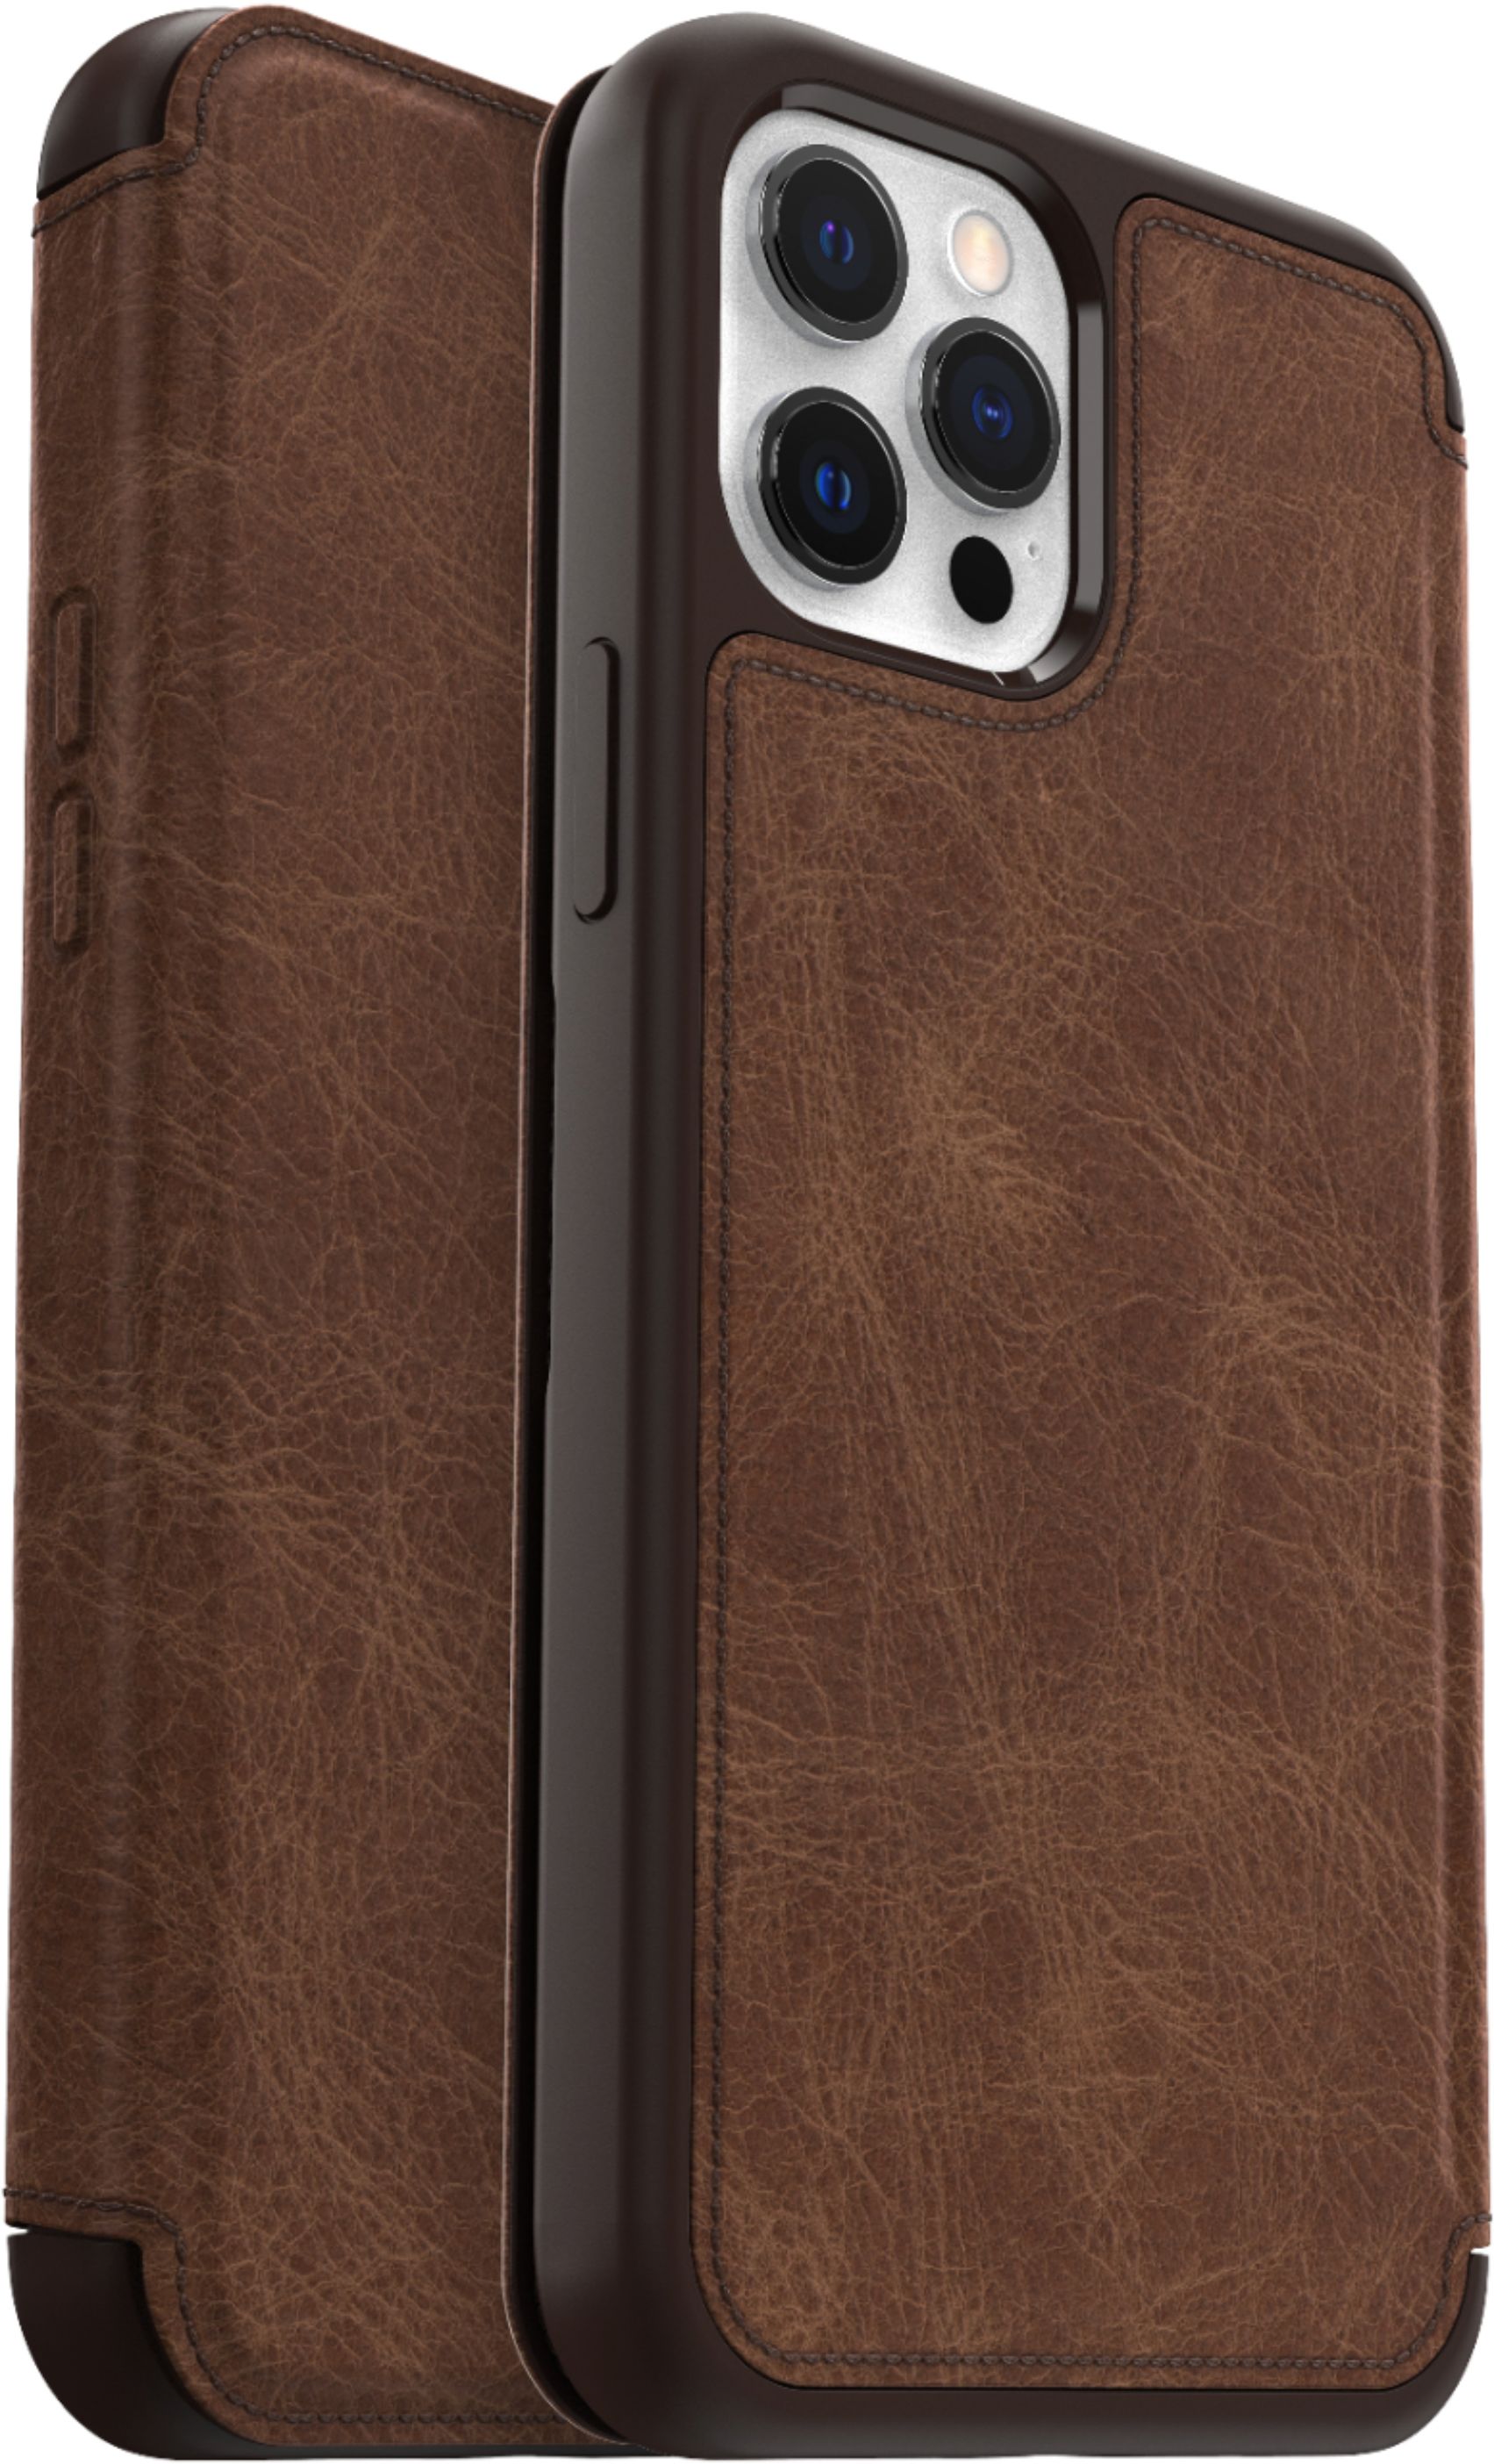  DAIZAG Case Compatible with iPhone 12 Pro Max,B Brown